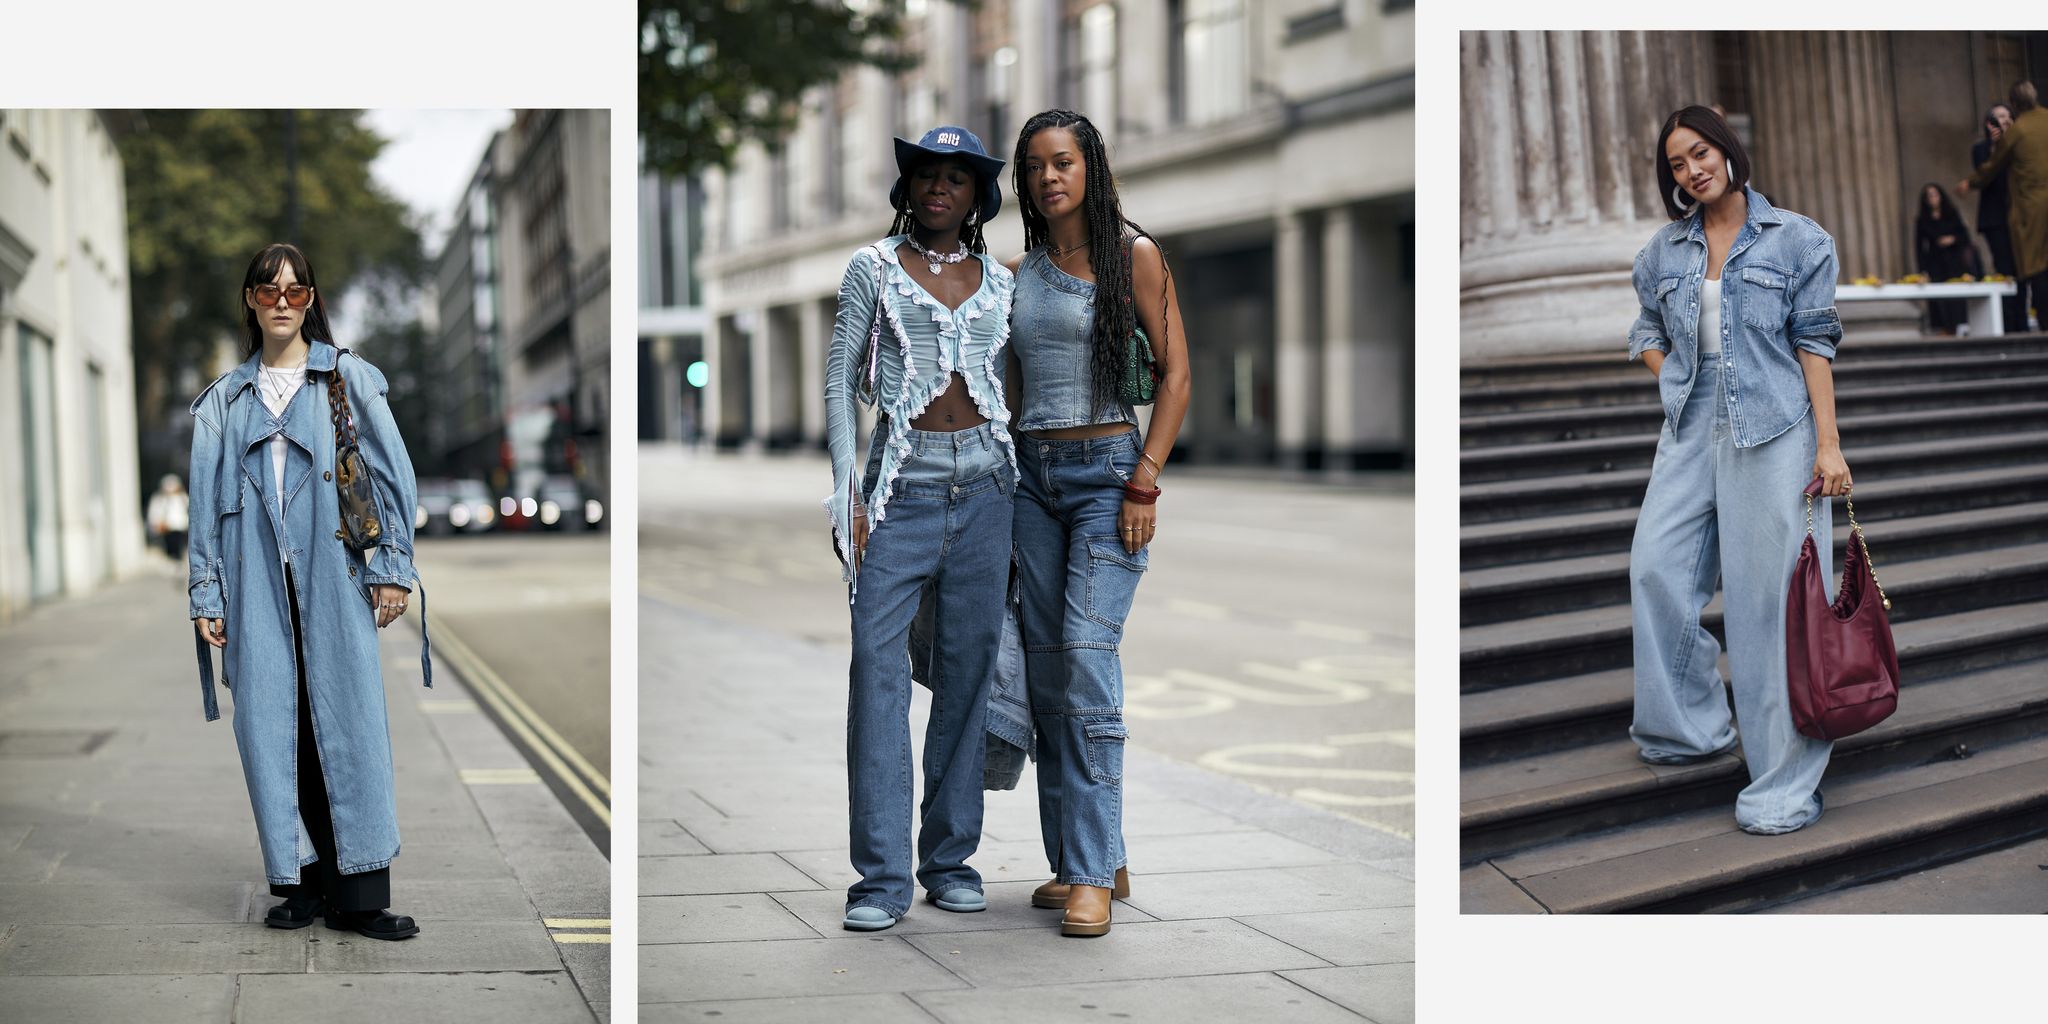 How to Wear Straight Leg Jeans - 6 Straight Leg Jean Outfit Ideas - Straight  A Style